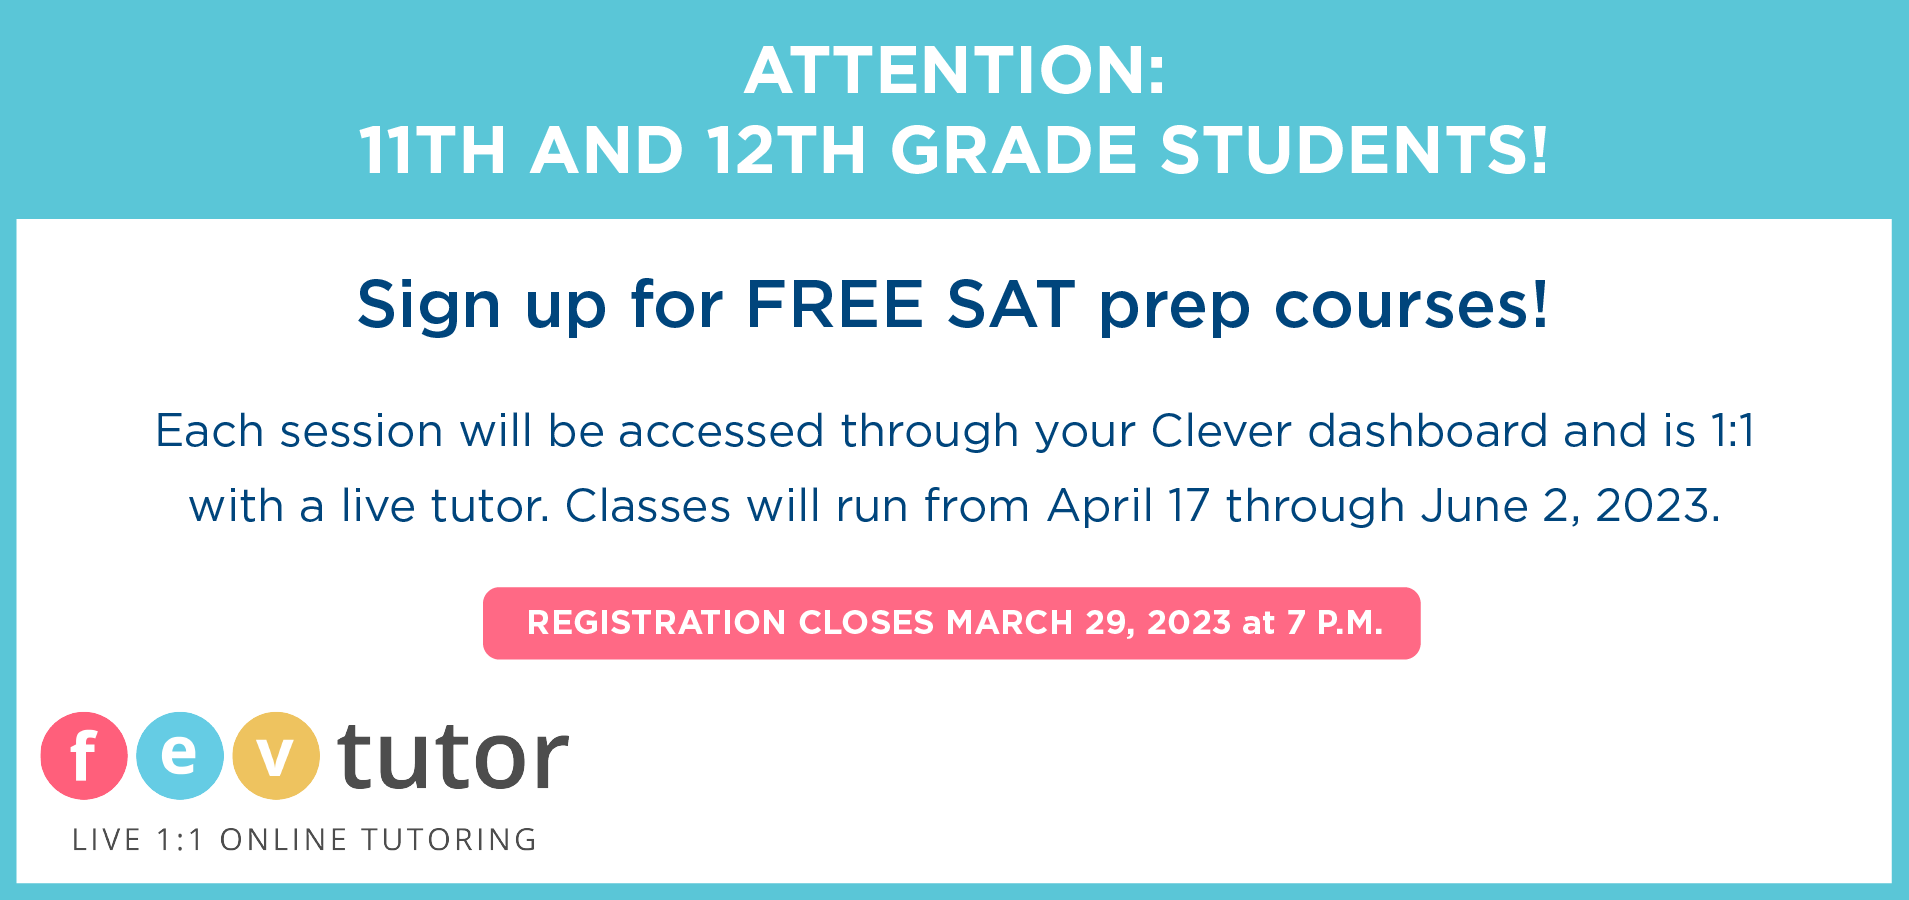 Attention: 11th and 12th grade students! Sign up for FREE SAT prep courses! Each session will be accessed through your Clever dashboard and is 1:1 with a live tutor. Classes will run from April 17 through June 2, 2023. Registration closes March 29, 2023 at 7:00 p.m.